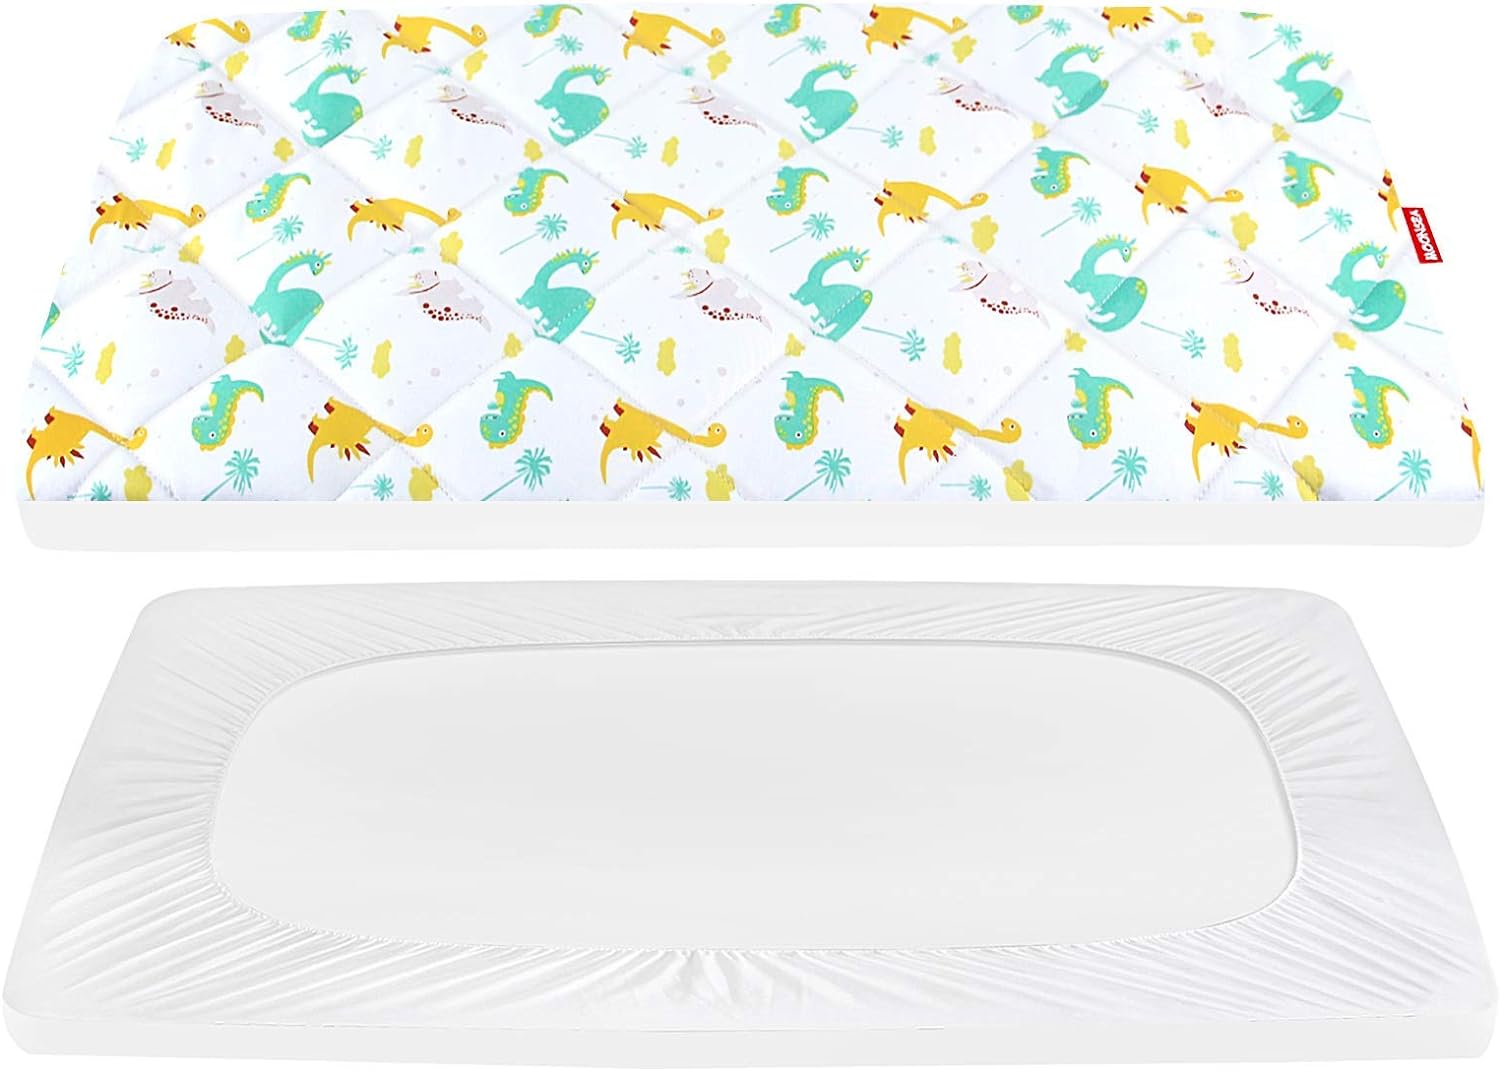 Pack n Play Sheet Quilted | Mini Crib Sheet - Pack and Play Mattress Pad Cover, Ultra-Soft Microfiber, Fits Graco Pack and Play, Dinosaur-Moonsea Bedding